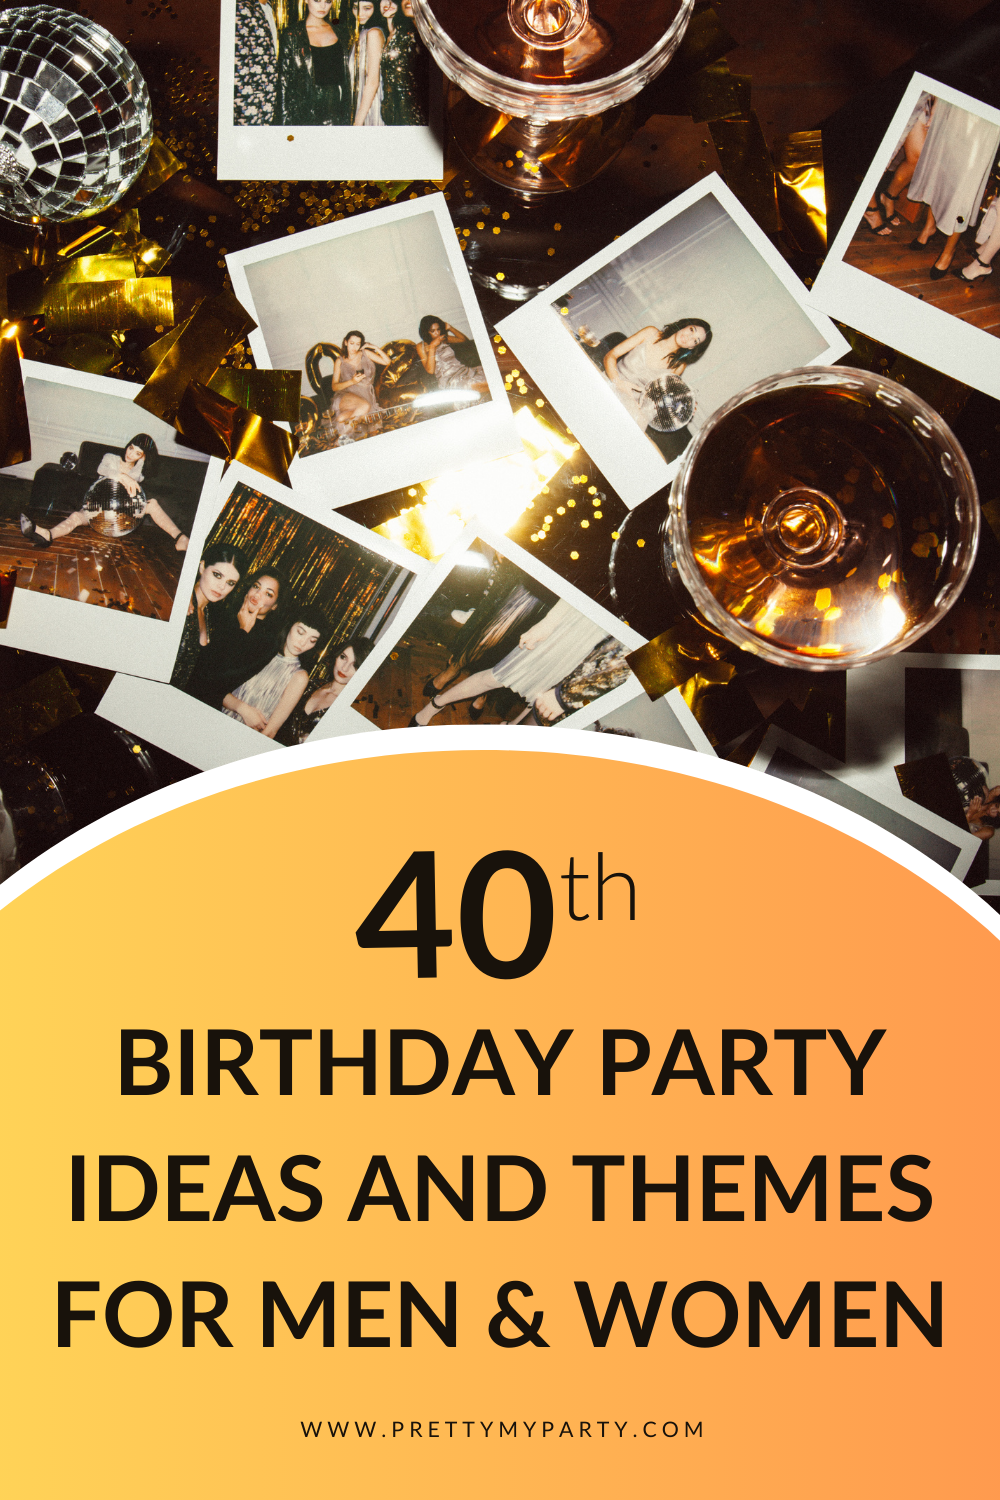 Fun and unique 40th birthday party ideas and themes for men and women on Pretty My Party